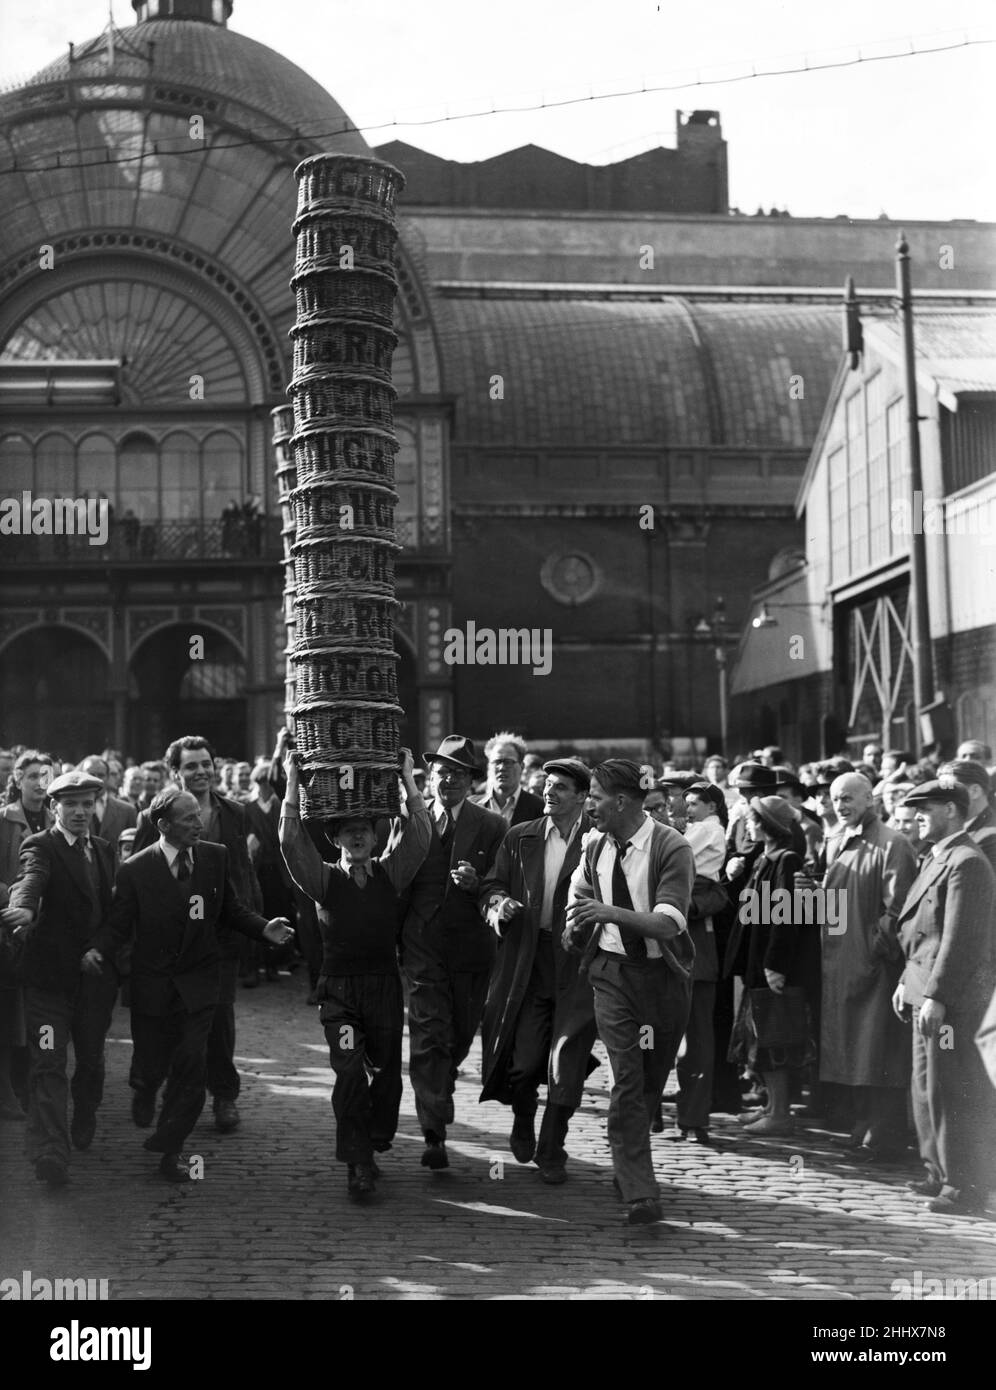 Porters from Covent Garden Flower and Vegetable market race with baskets stacked on their head as part of the Covent Garden Flower Show 12th June 1951 Stock Photo